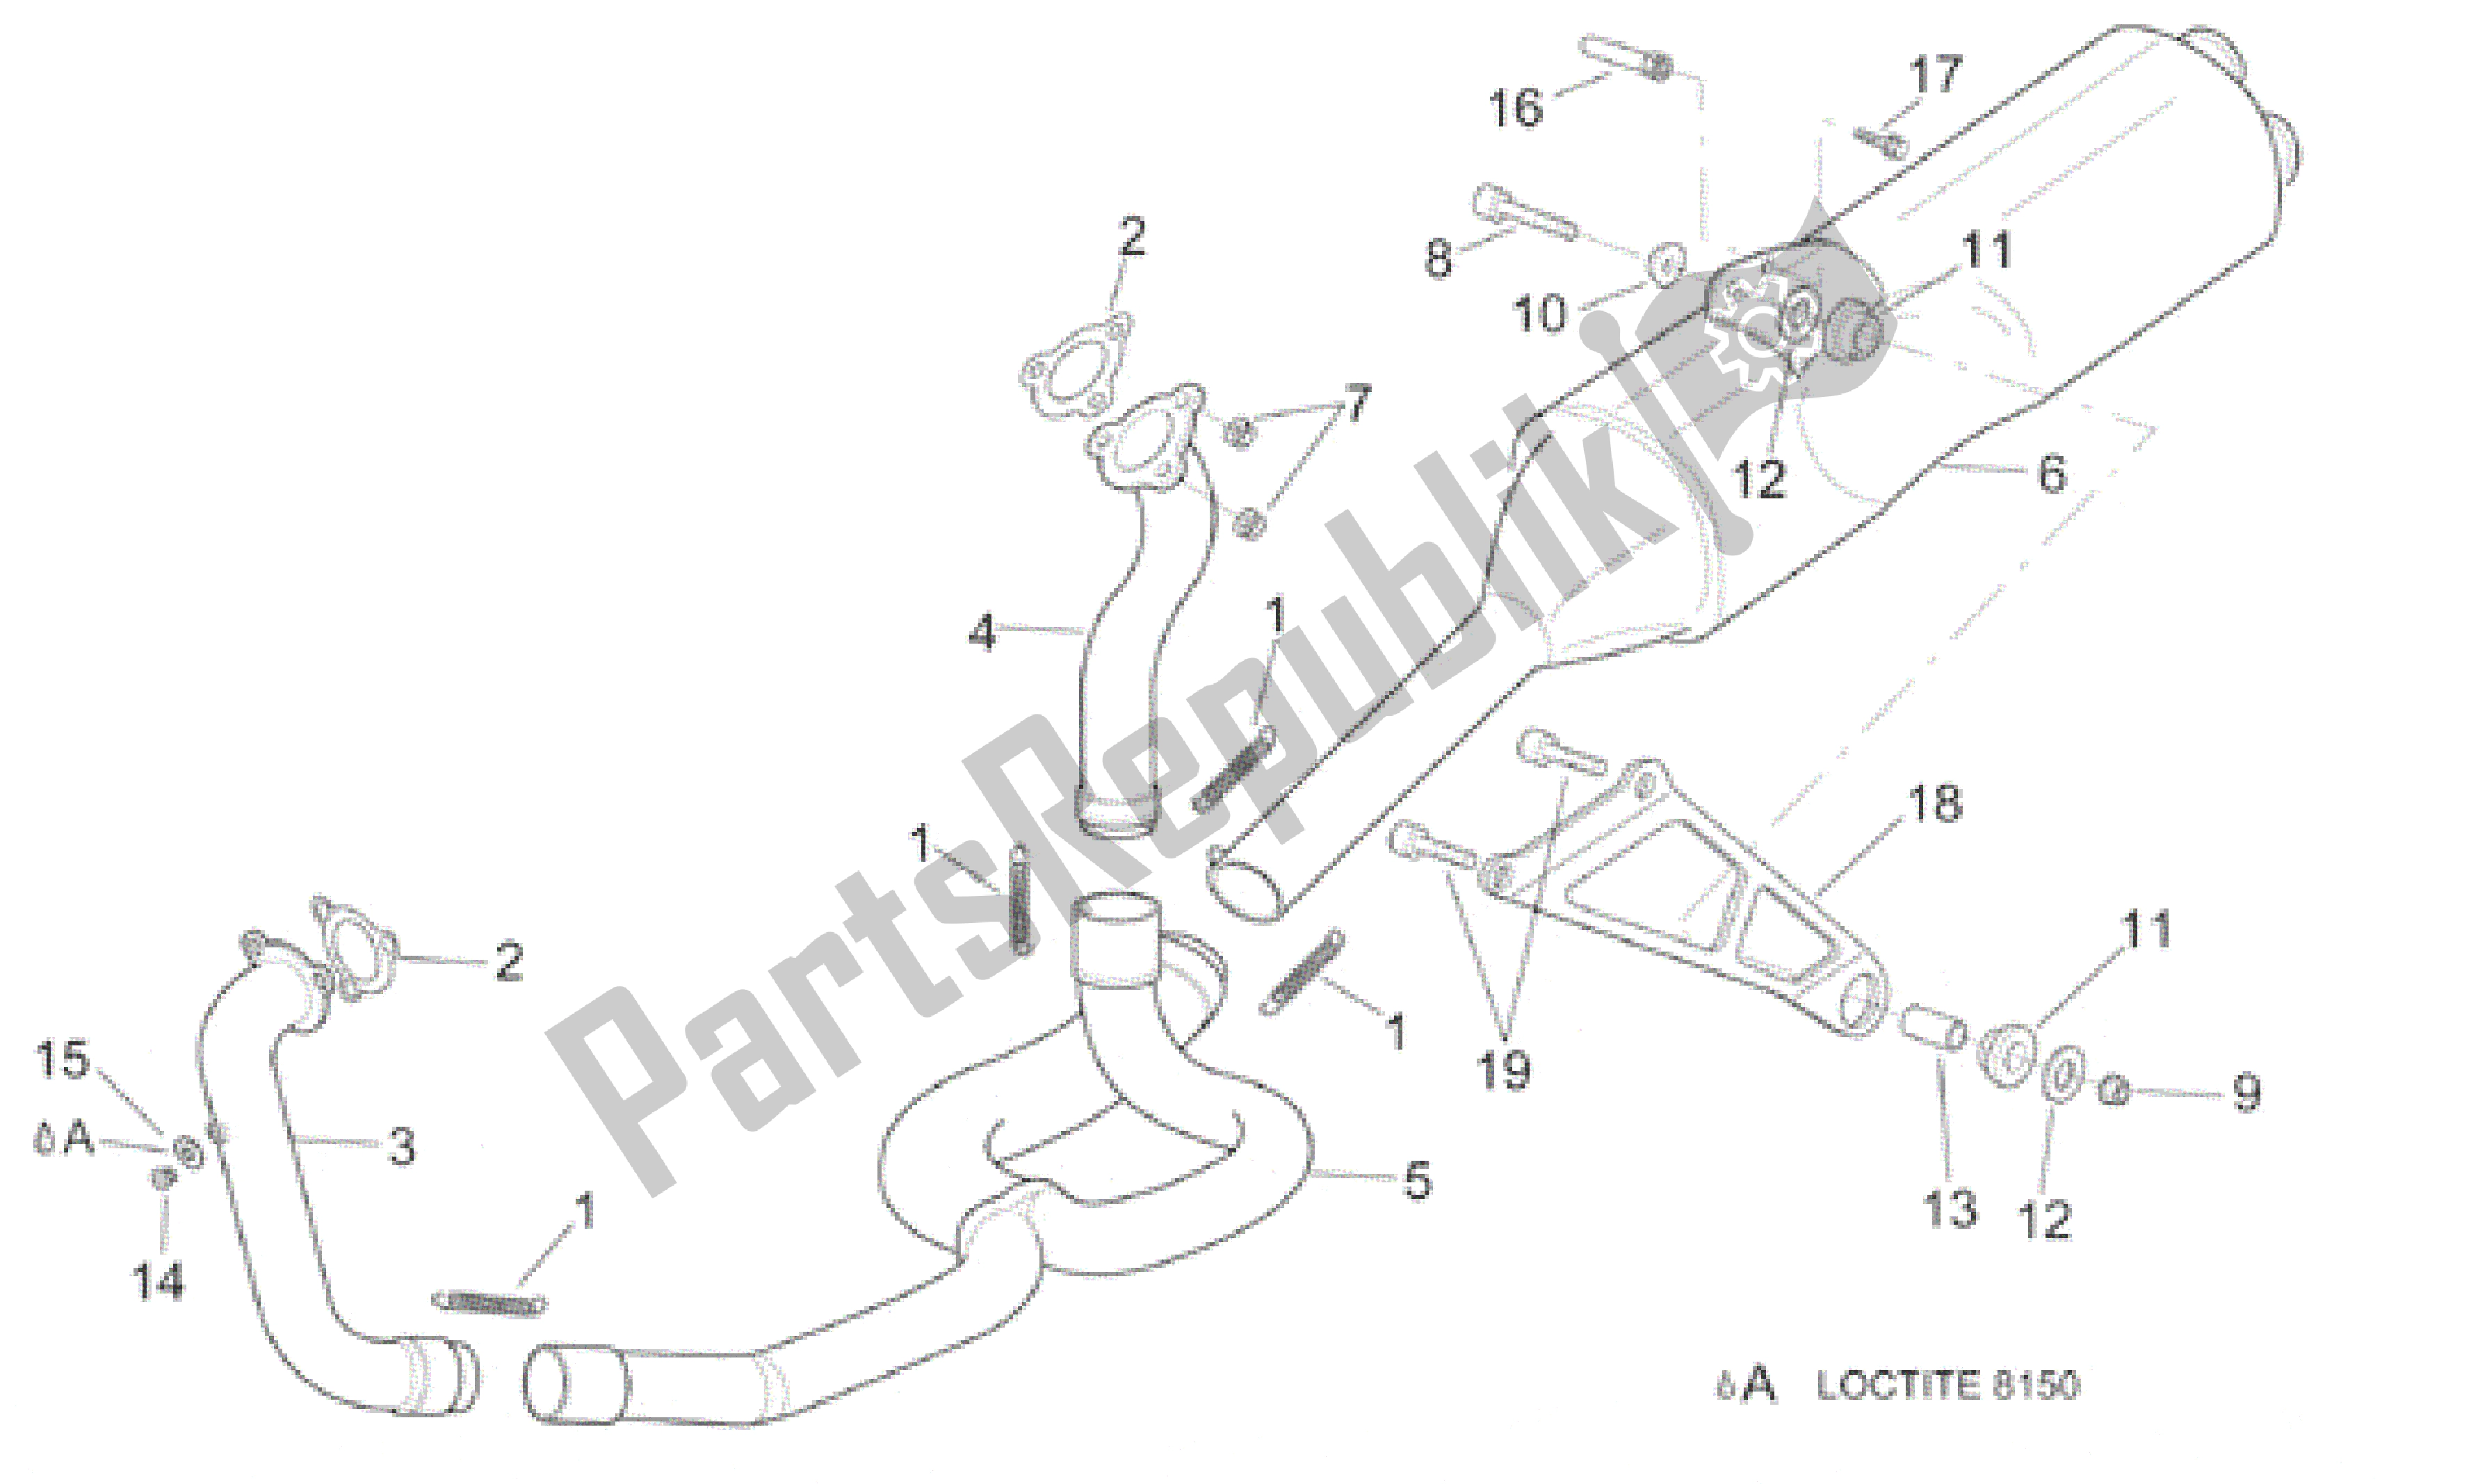 All parts for the Exhaust Pipe of the Aprilia RSV Mille 3901 1000 2001 - 2002